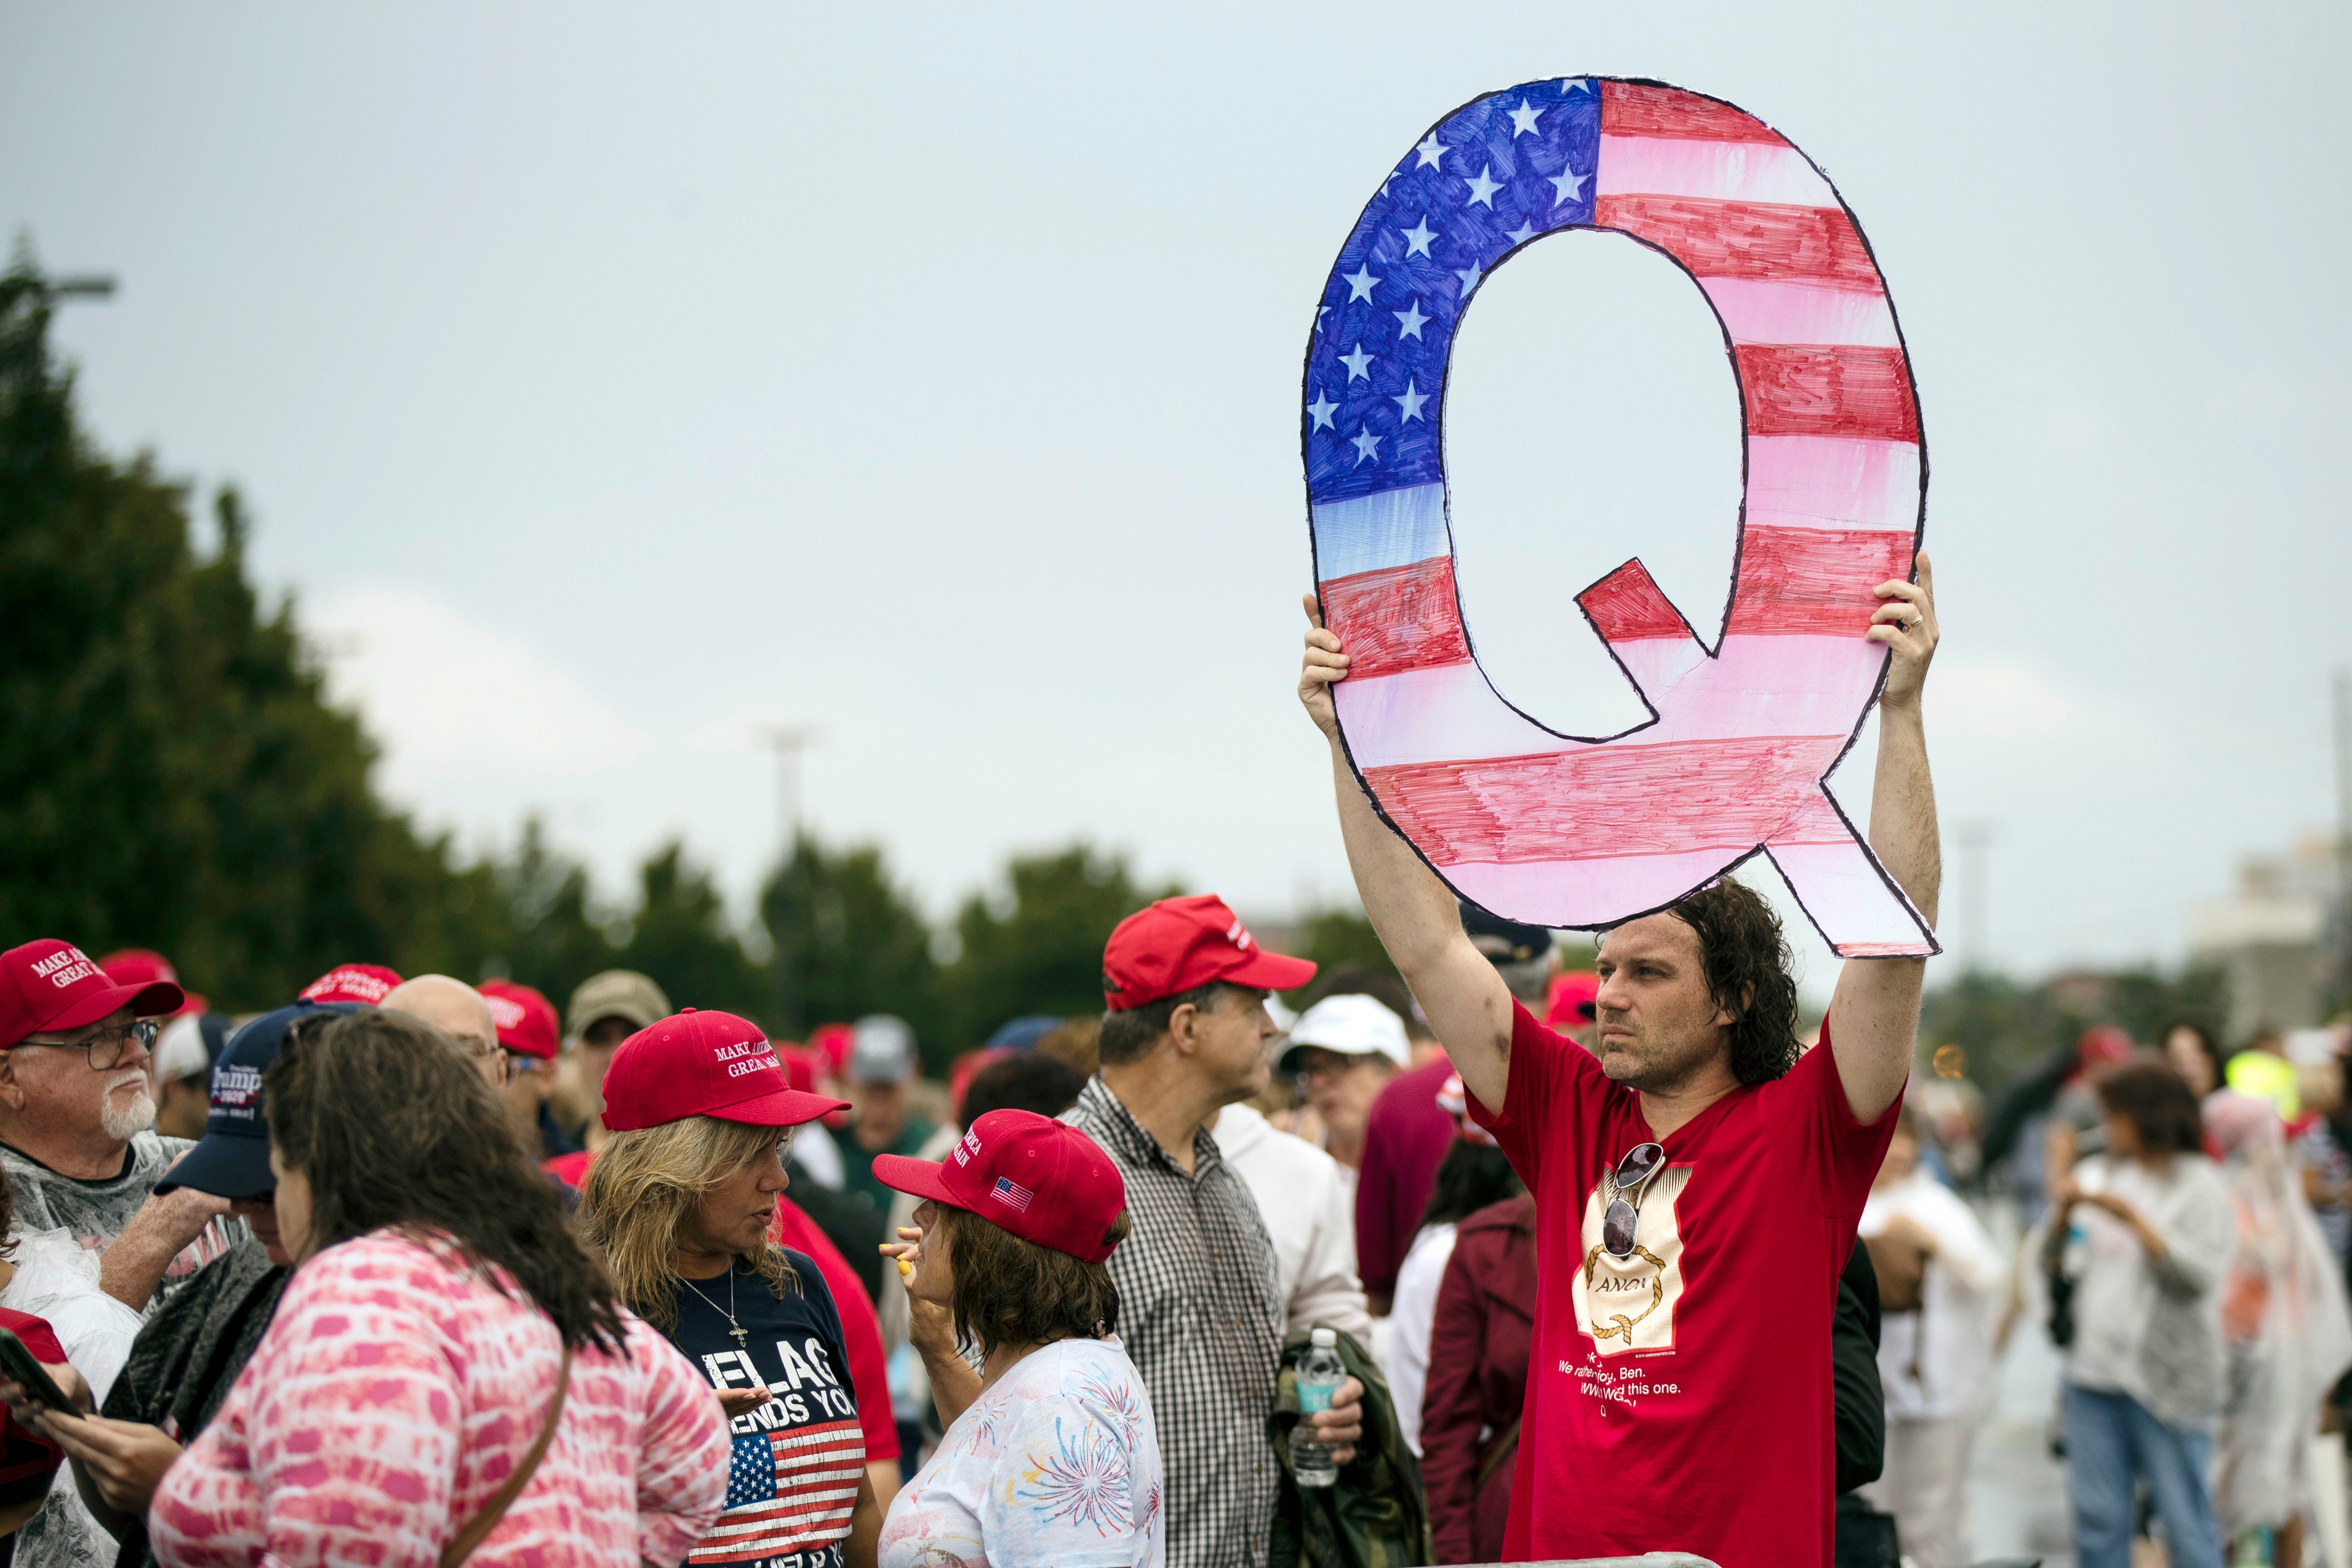 File A protester holds a Q sign as he waits in line with others to enter a campaign rally with President Donald Trump in Wilkes